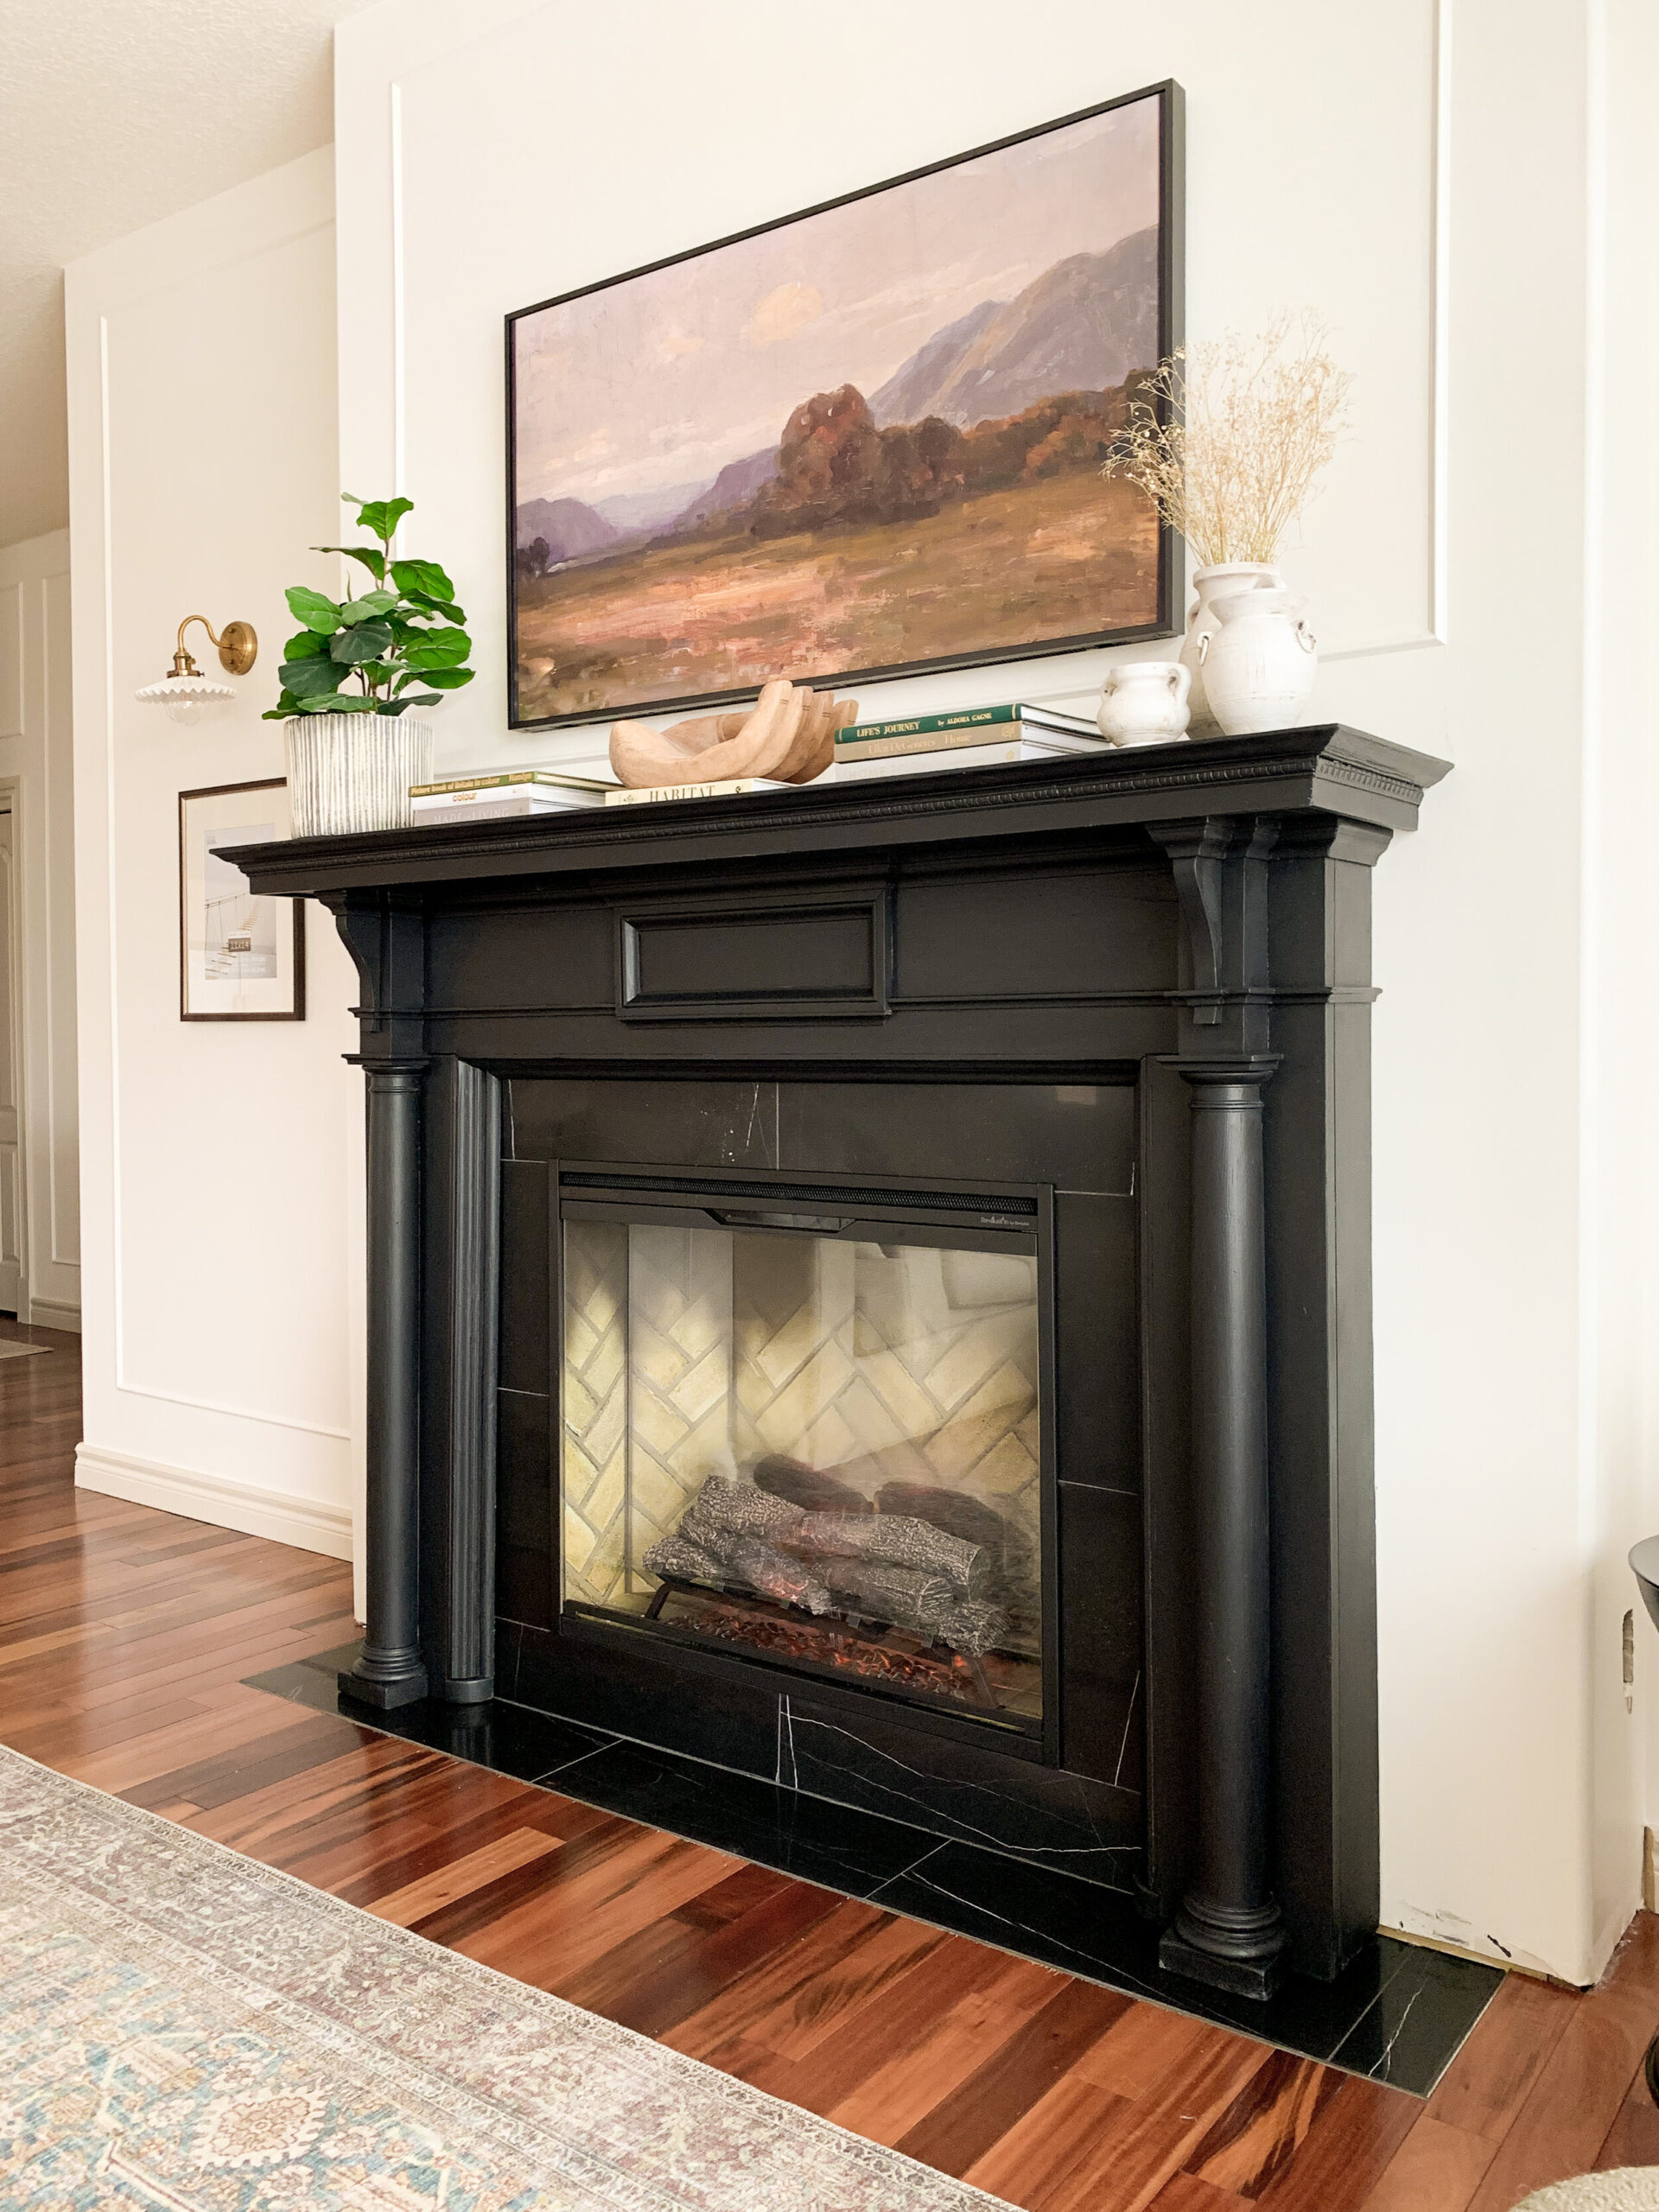 electric fireplace with black antique mantel and black marble surround and hearth with samsung frame TV above and styling on mantel